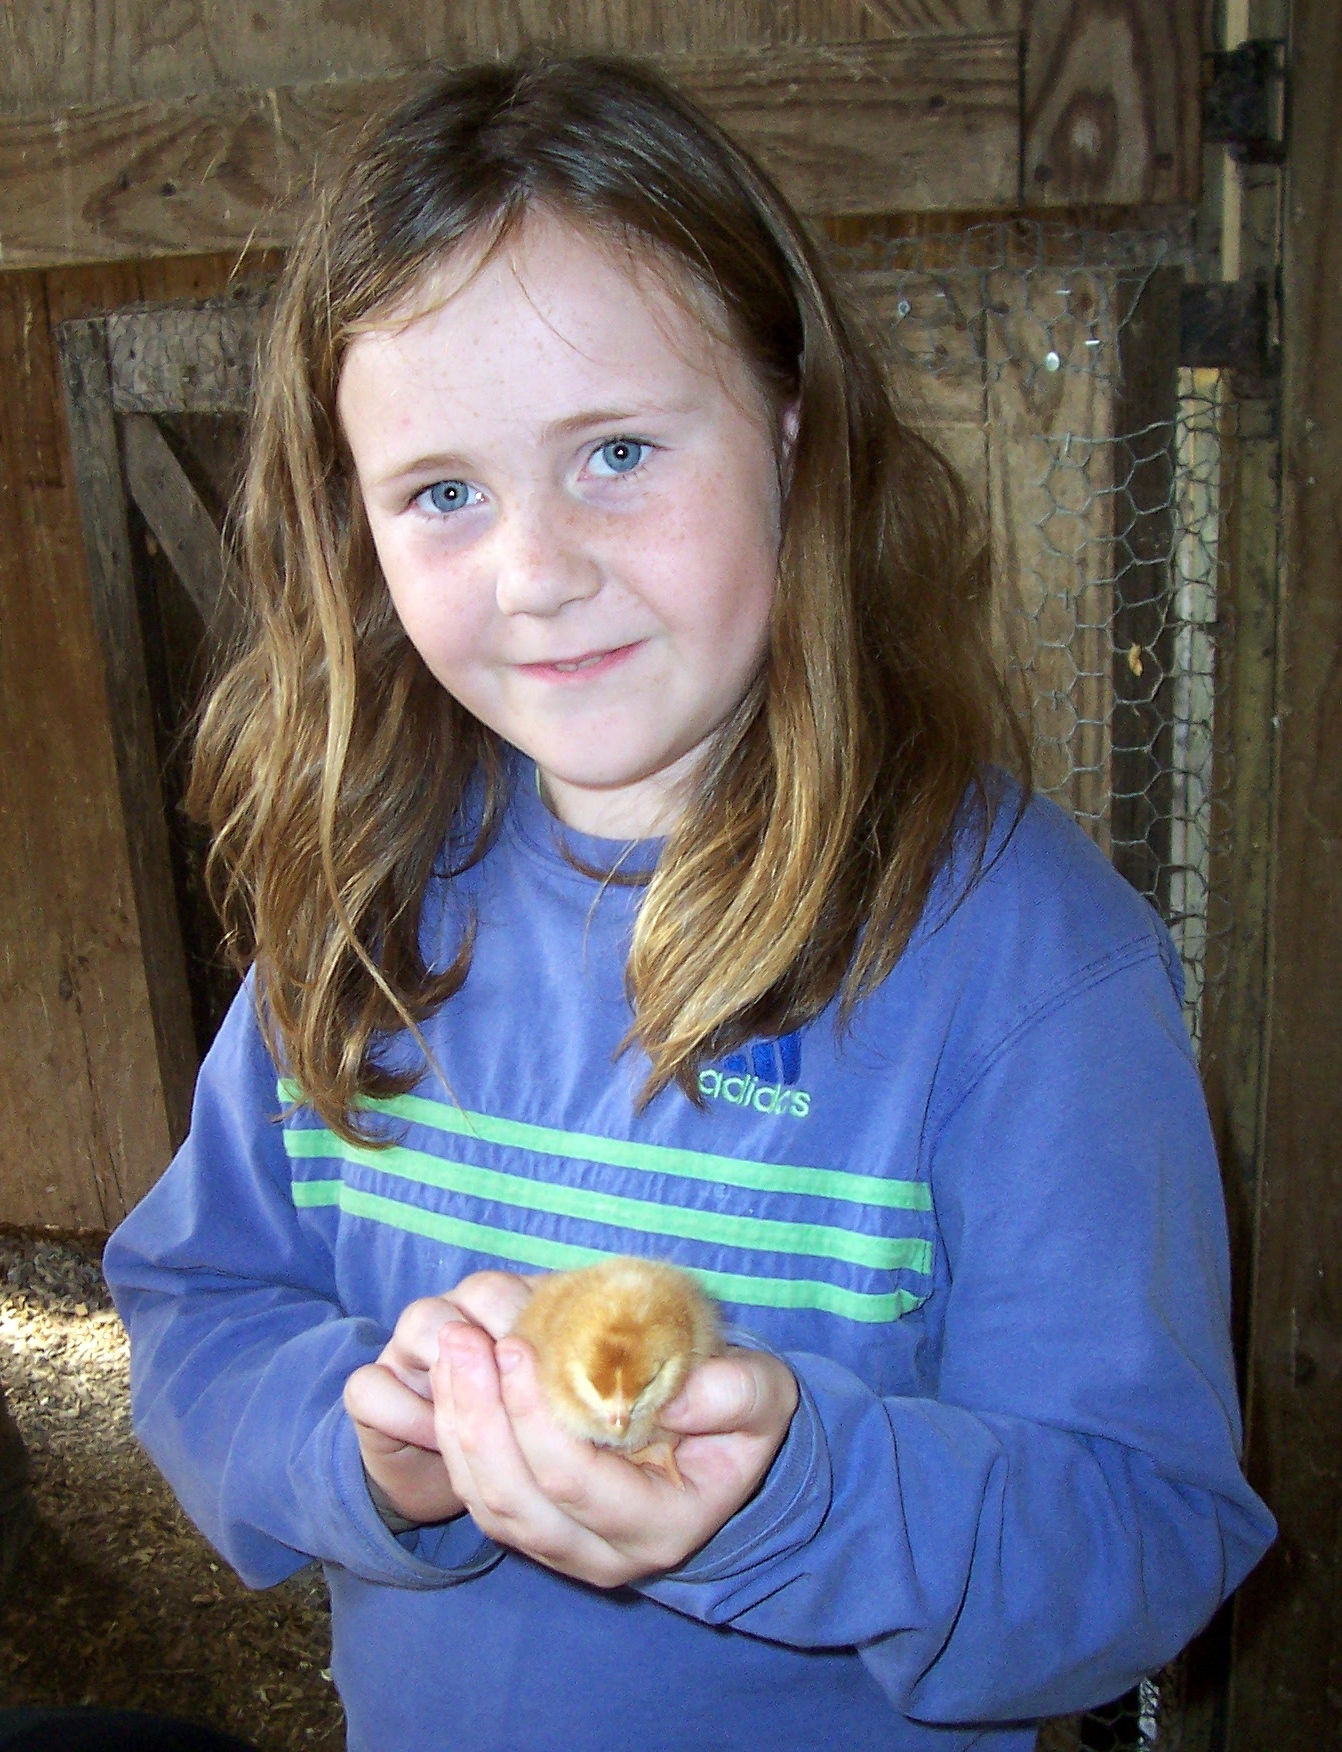 We also got to hold some new baby chicks. Everyone liked that!